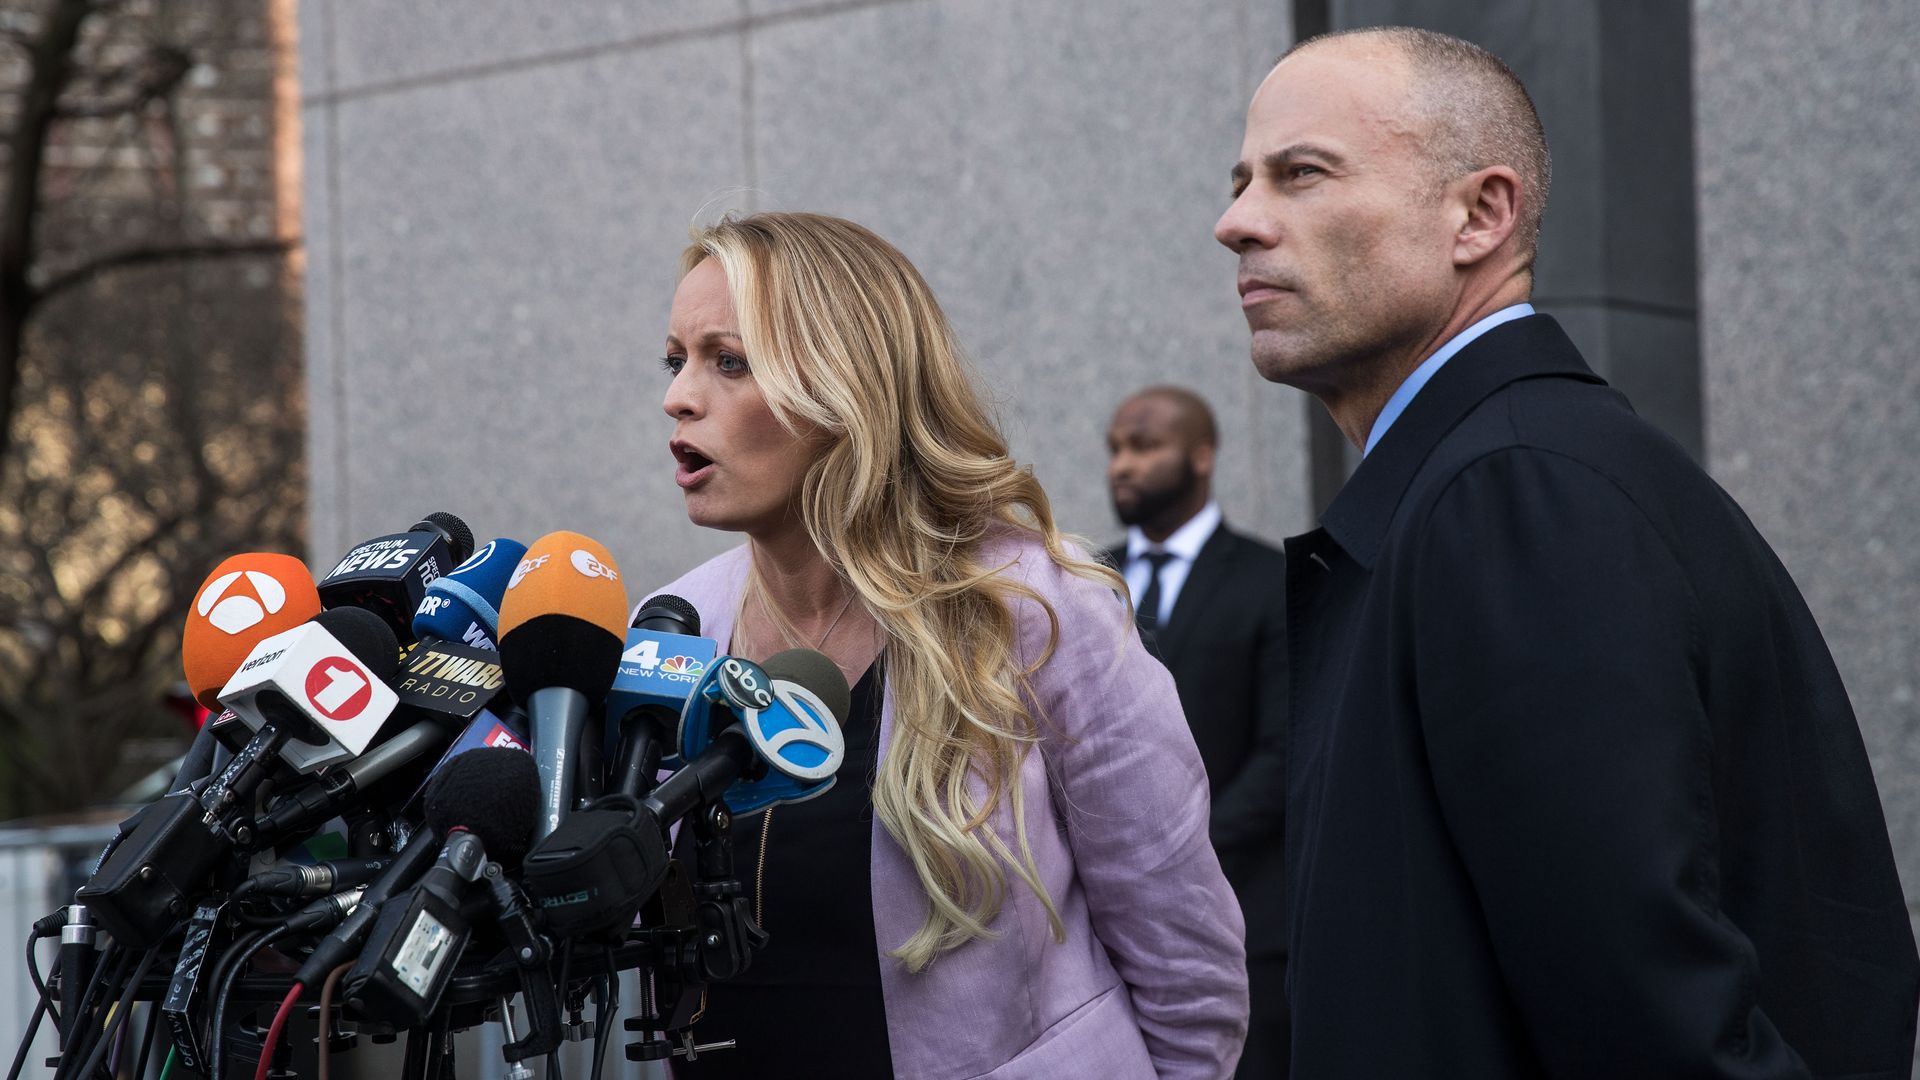 Adult film actress Stormy Daniels (Stephanie Clifford) and attorney Michael Avenatti. Photo: Drew Angerer/Getty Images